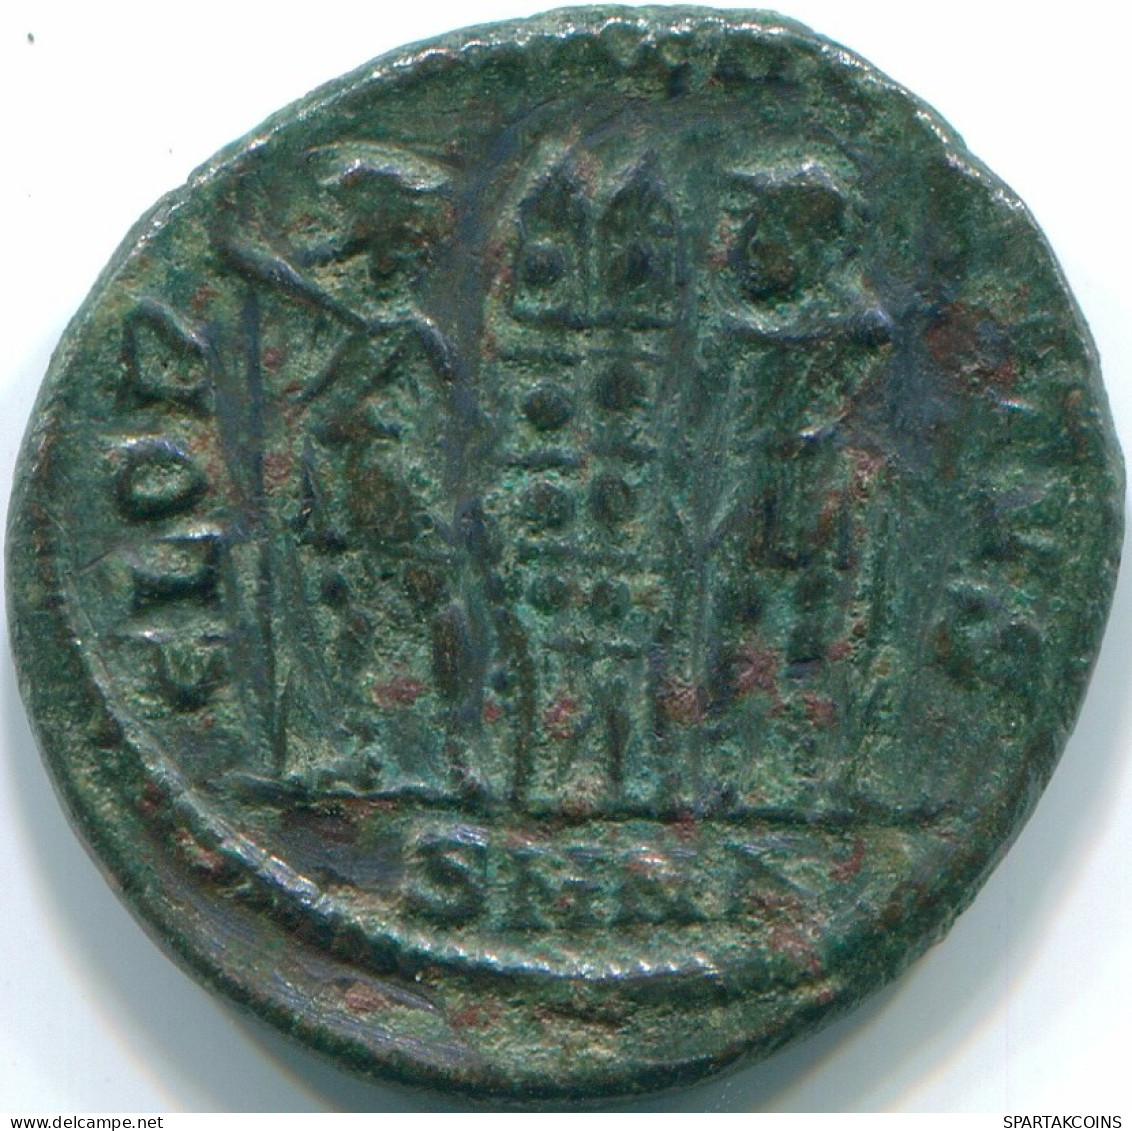 CONSTANTINE II Heraclea Mint AD 330-333 Two Soldiers 2.45g/17.7mm #ROM1033.8.D.A - El Imperio Christiano (307 / 363)